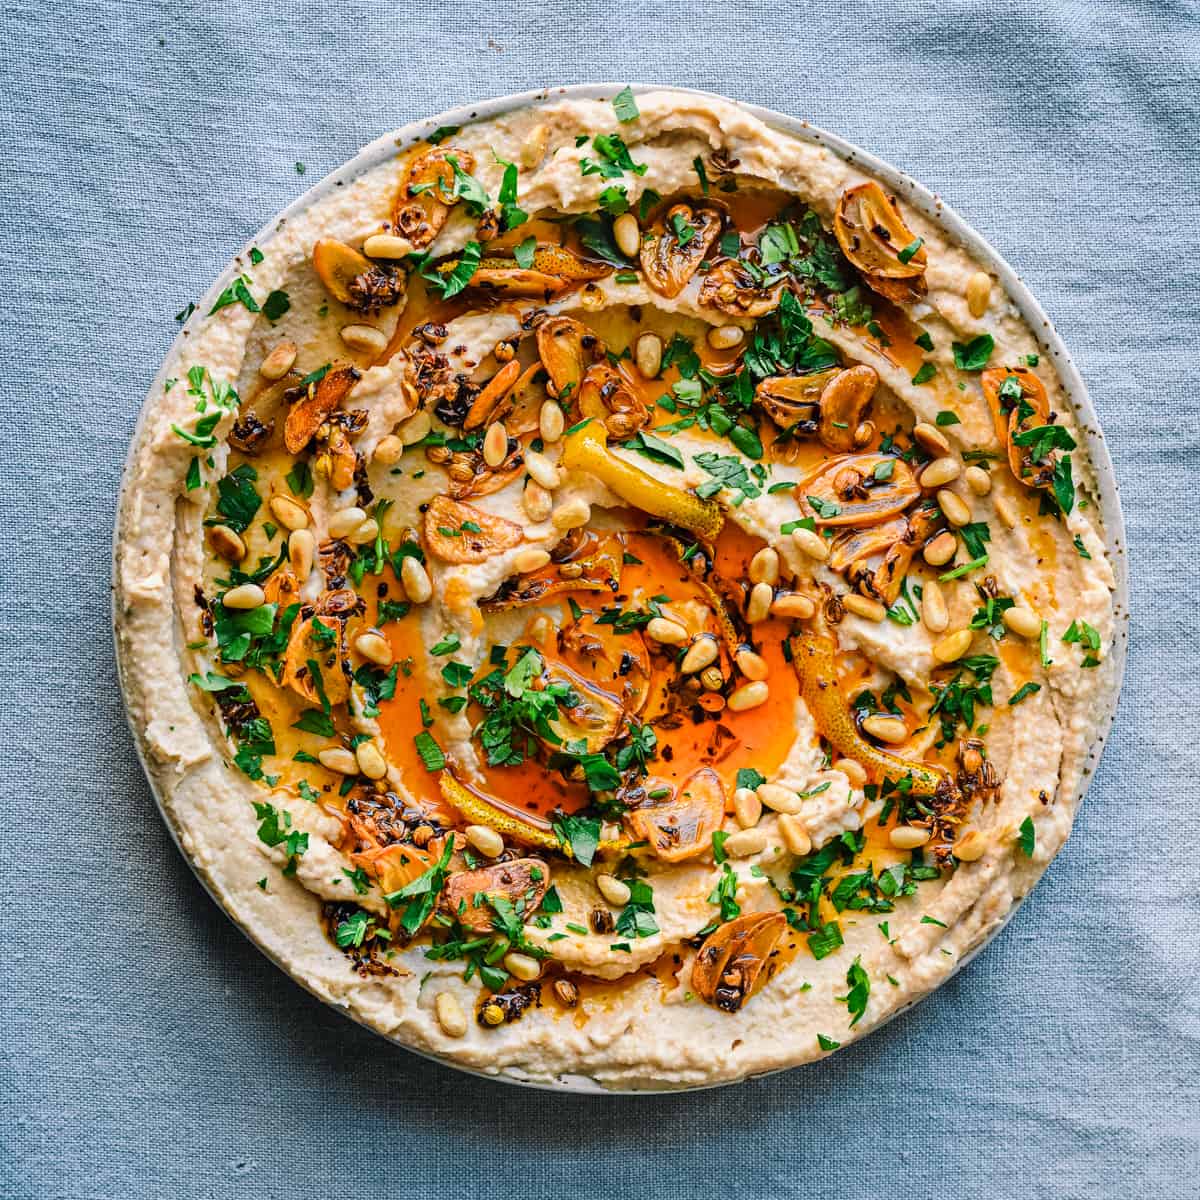 white bean dip with chili oil, garlic, parsley and pine nuts